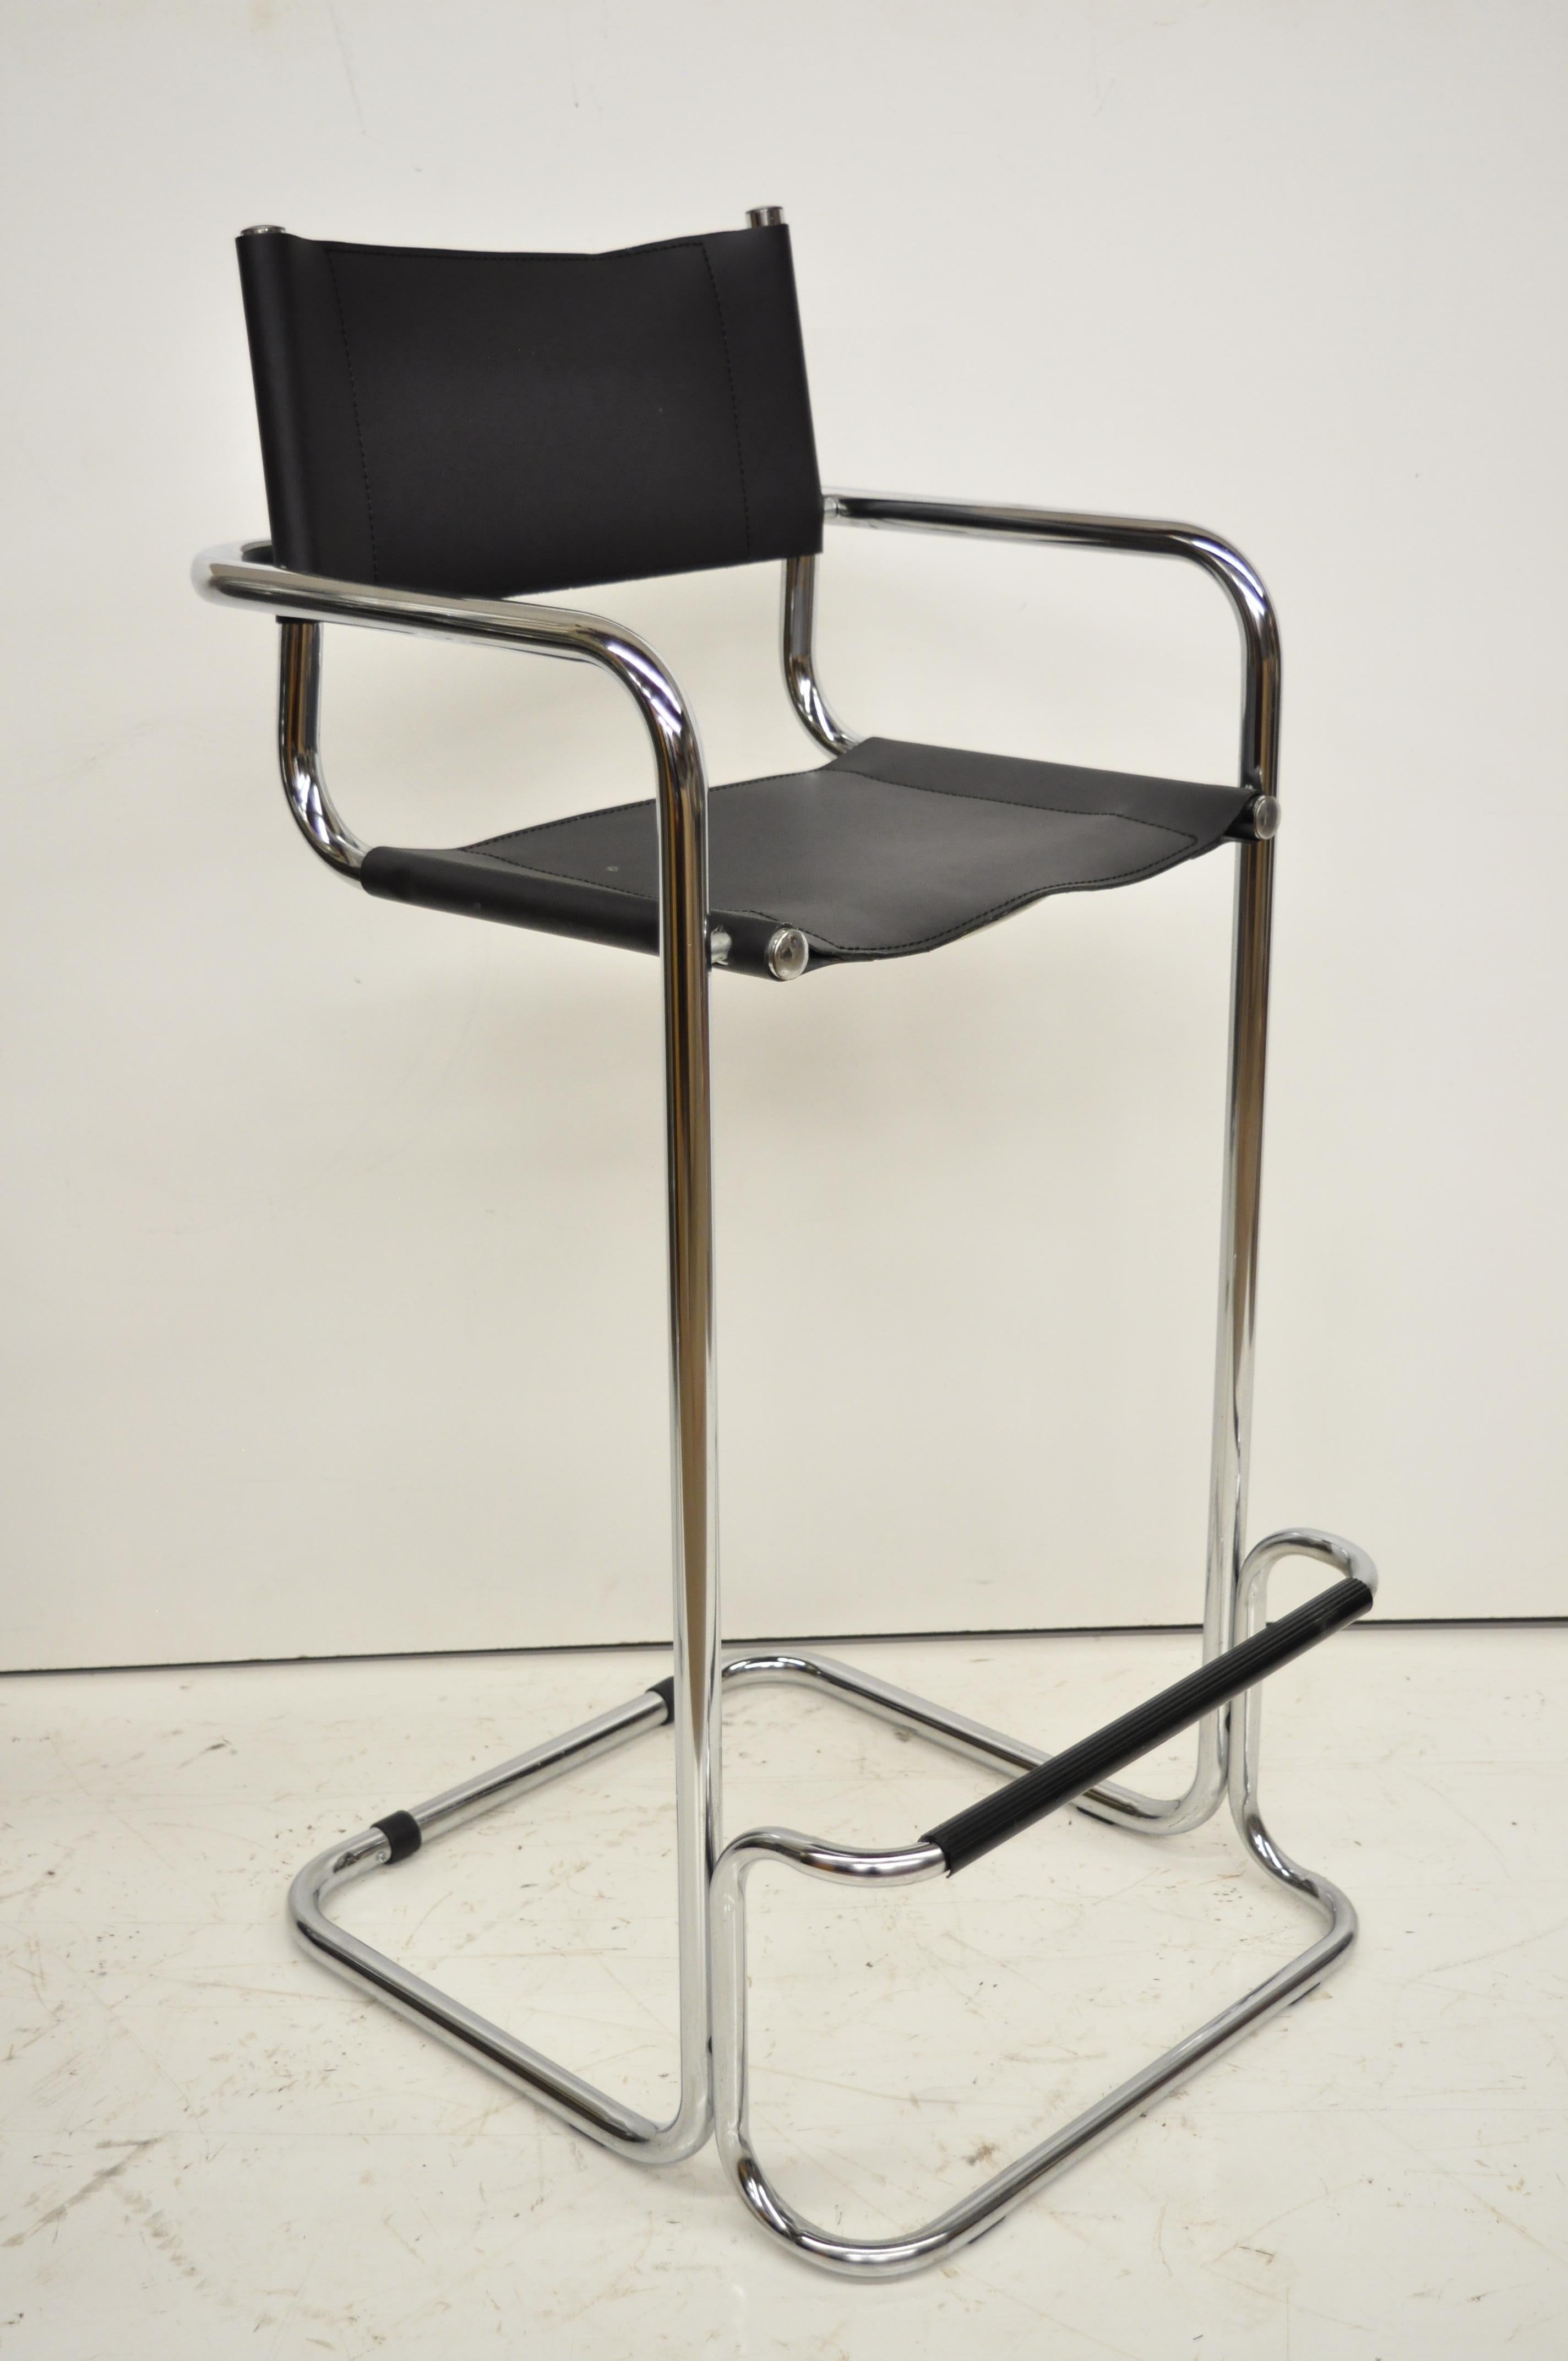 Mart Stam black leather and chrome Italian Mid-Century Modern barstools set of four. Item features chrome metal frames, leather back and seat, and a sleek sculptural form, circa 1970. Measurements: 42